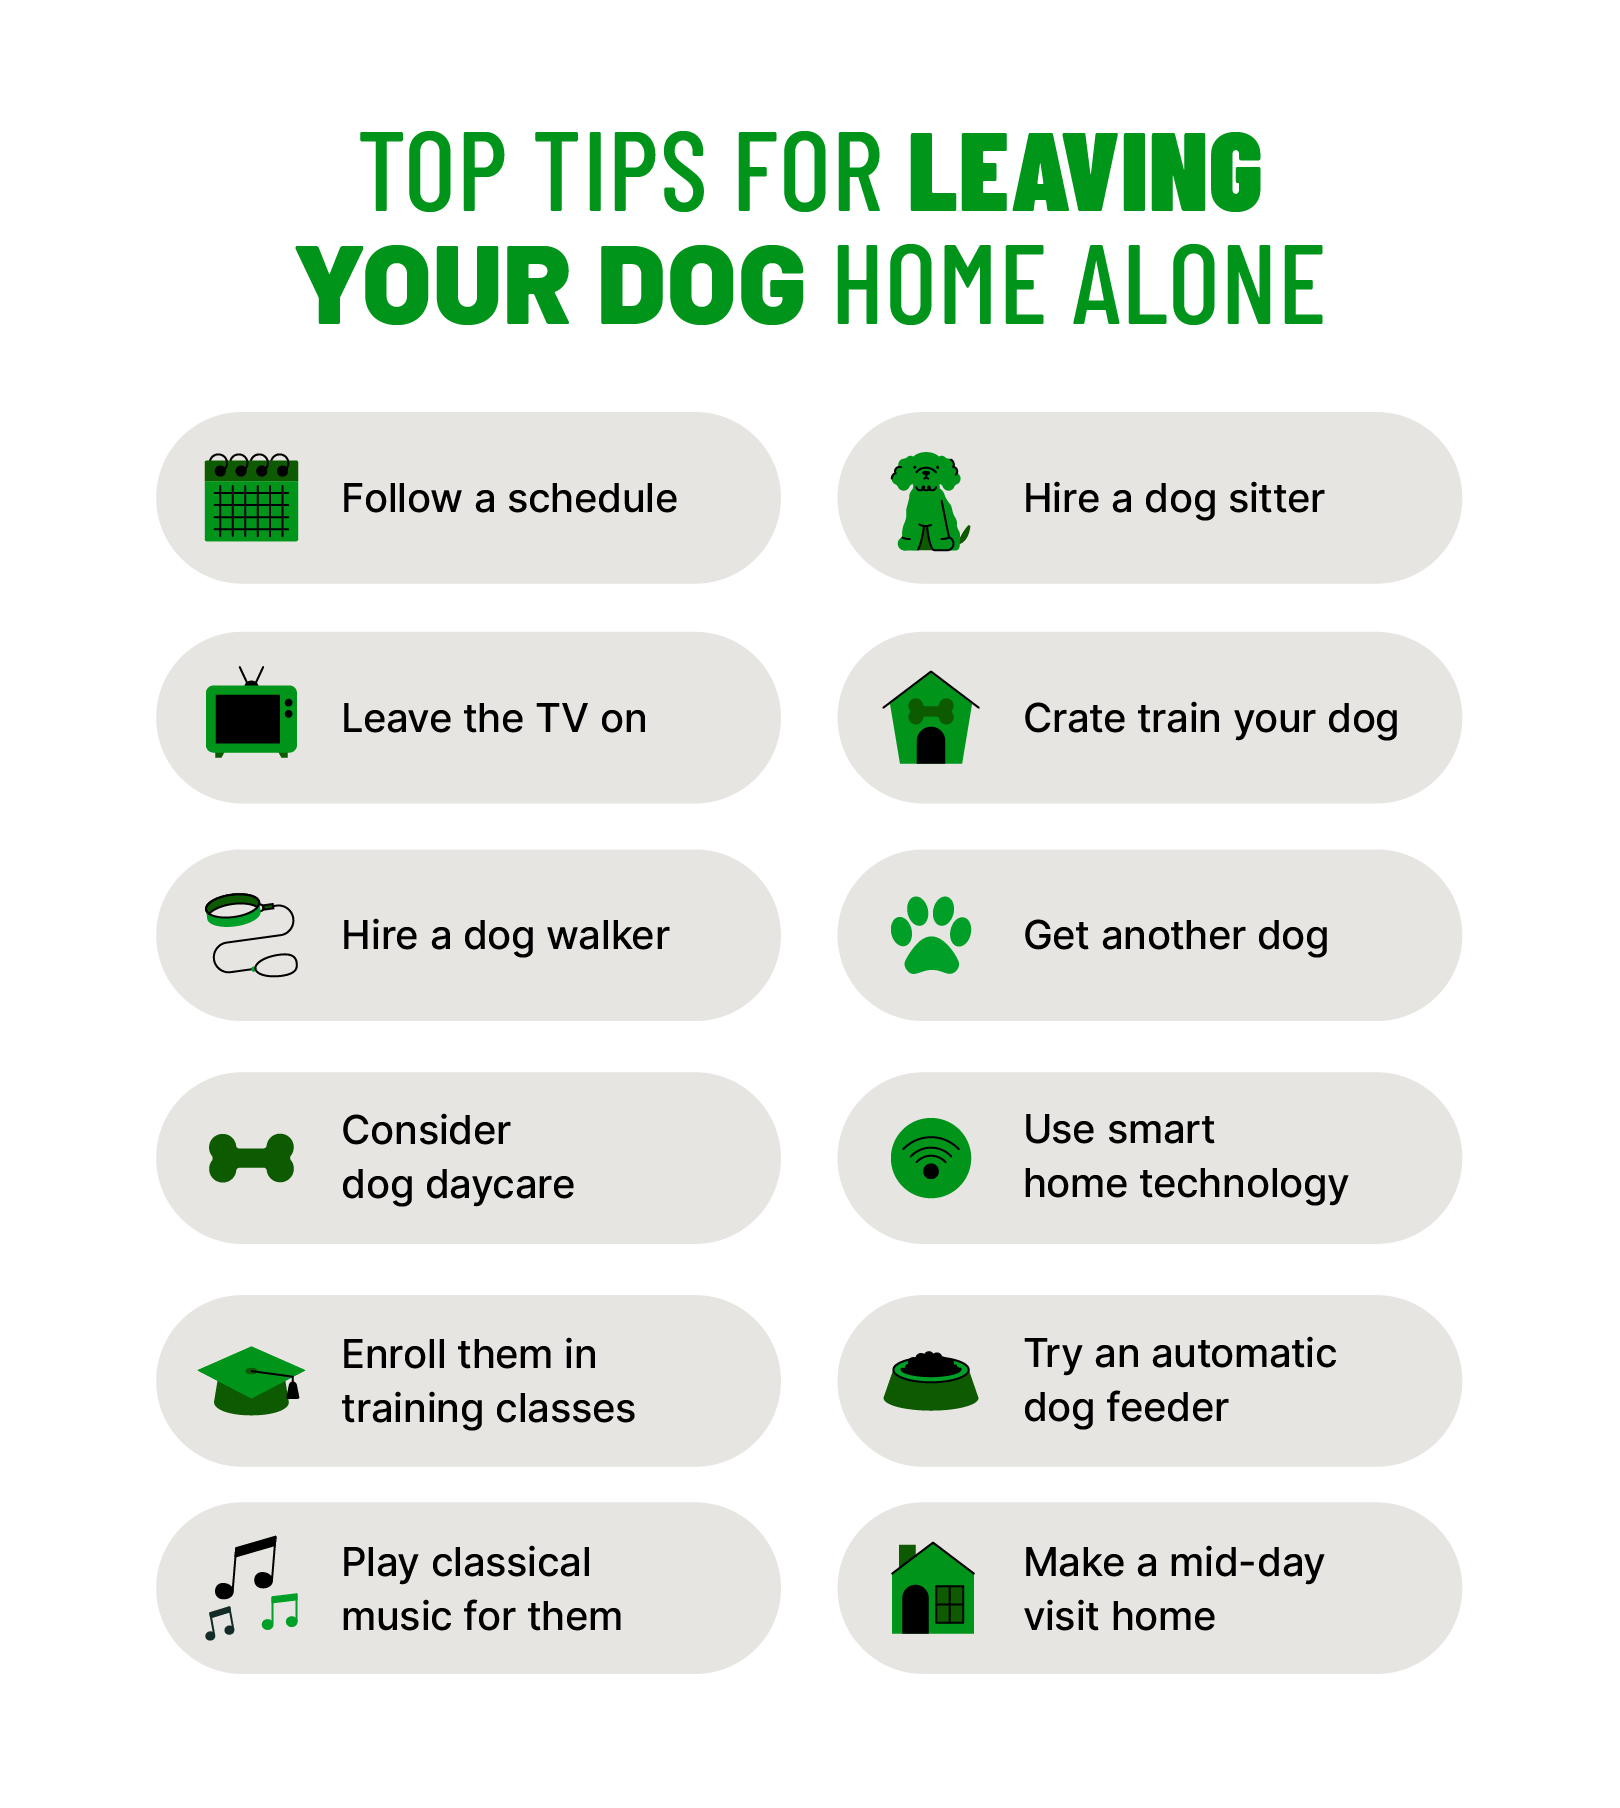 https://www.hippo.com/sites/default/files/content/paragraphs/inline/top-tips-for-leaving-your-dog-alone.png